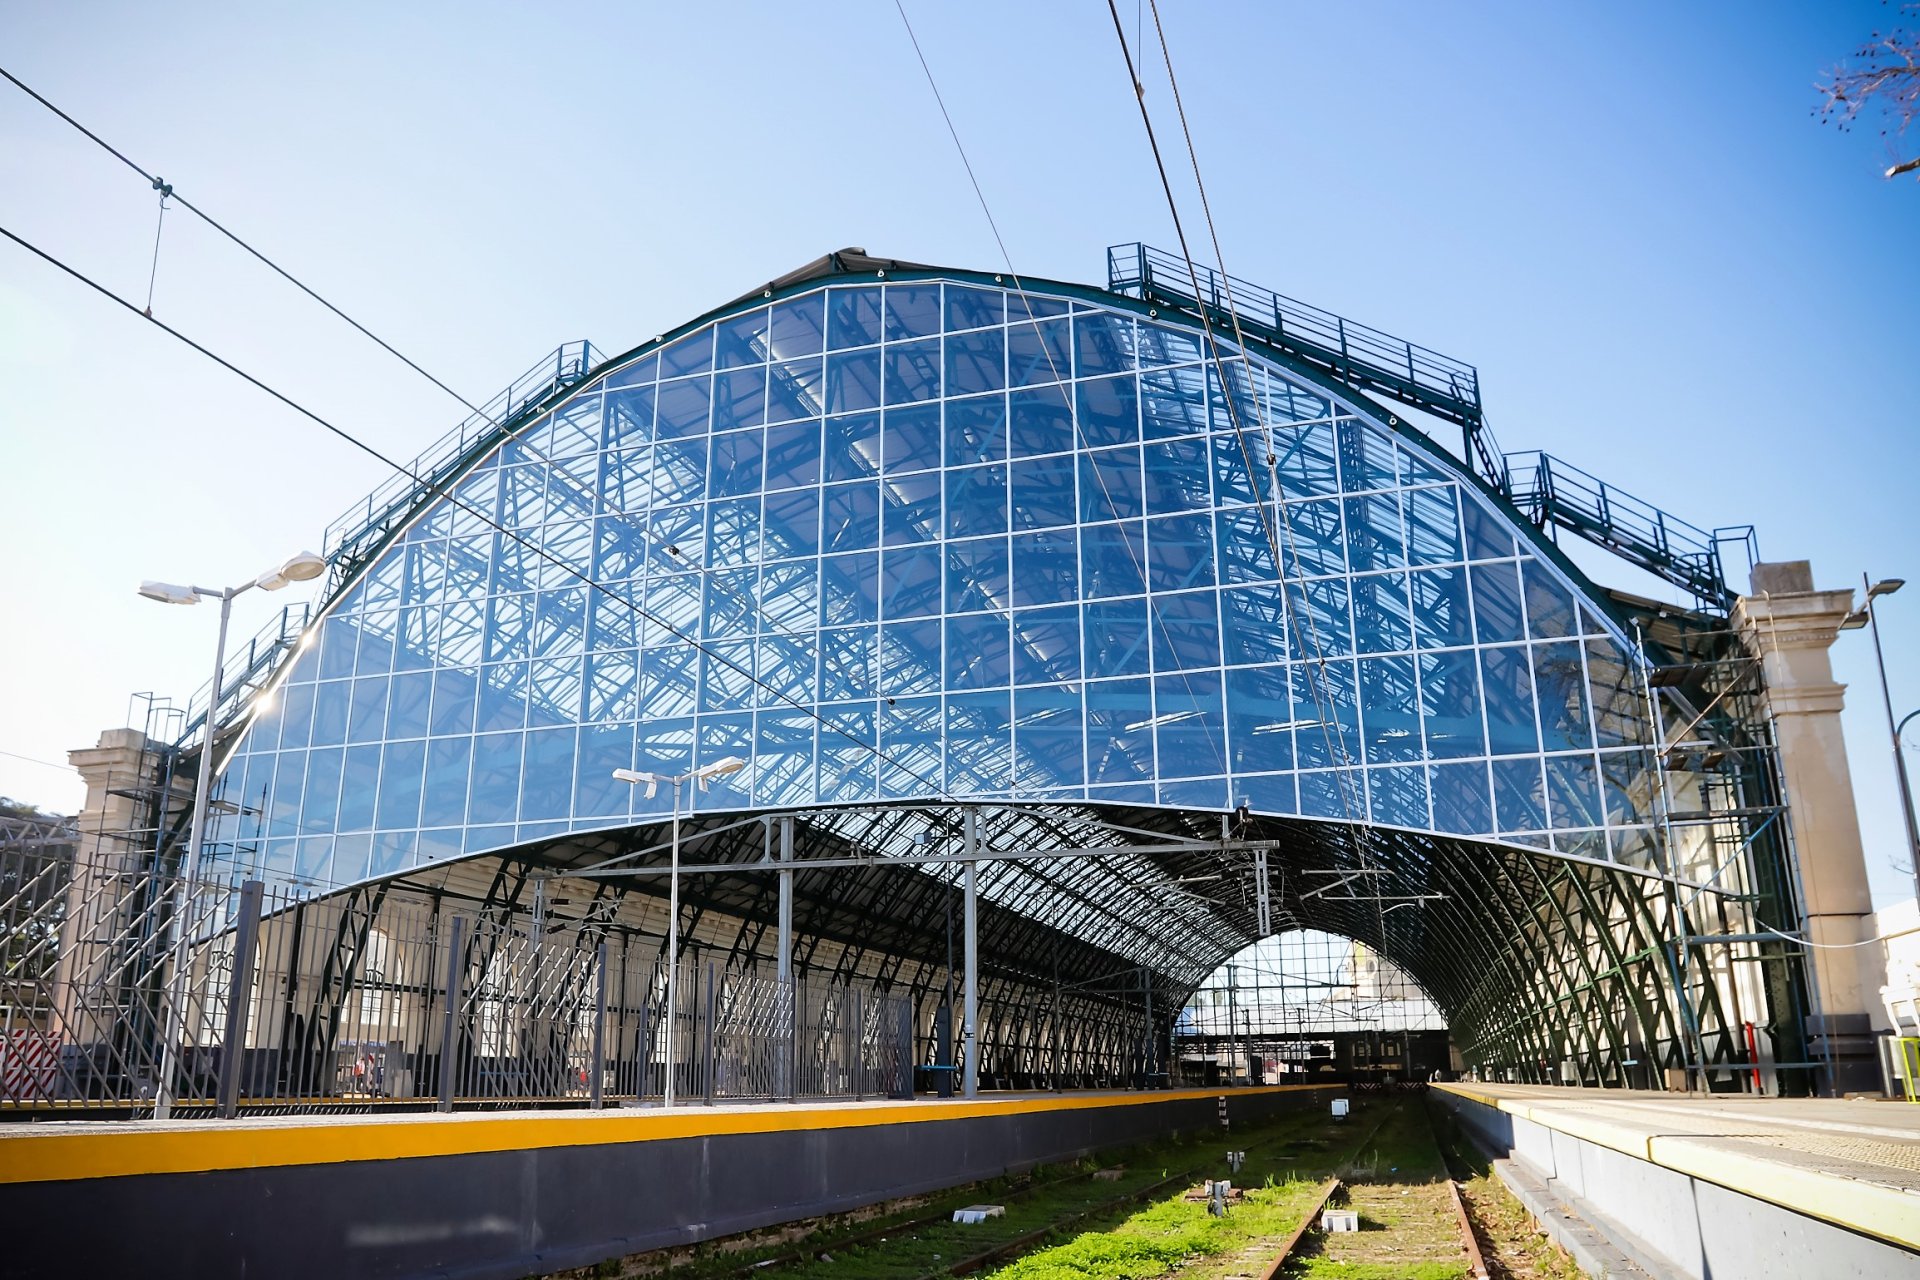 Renovation of the roofs of the La Plata station is nearing completion